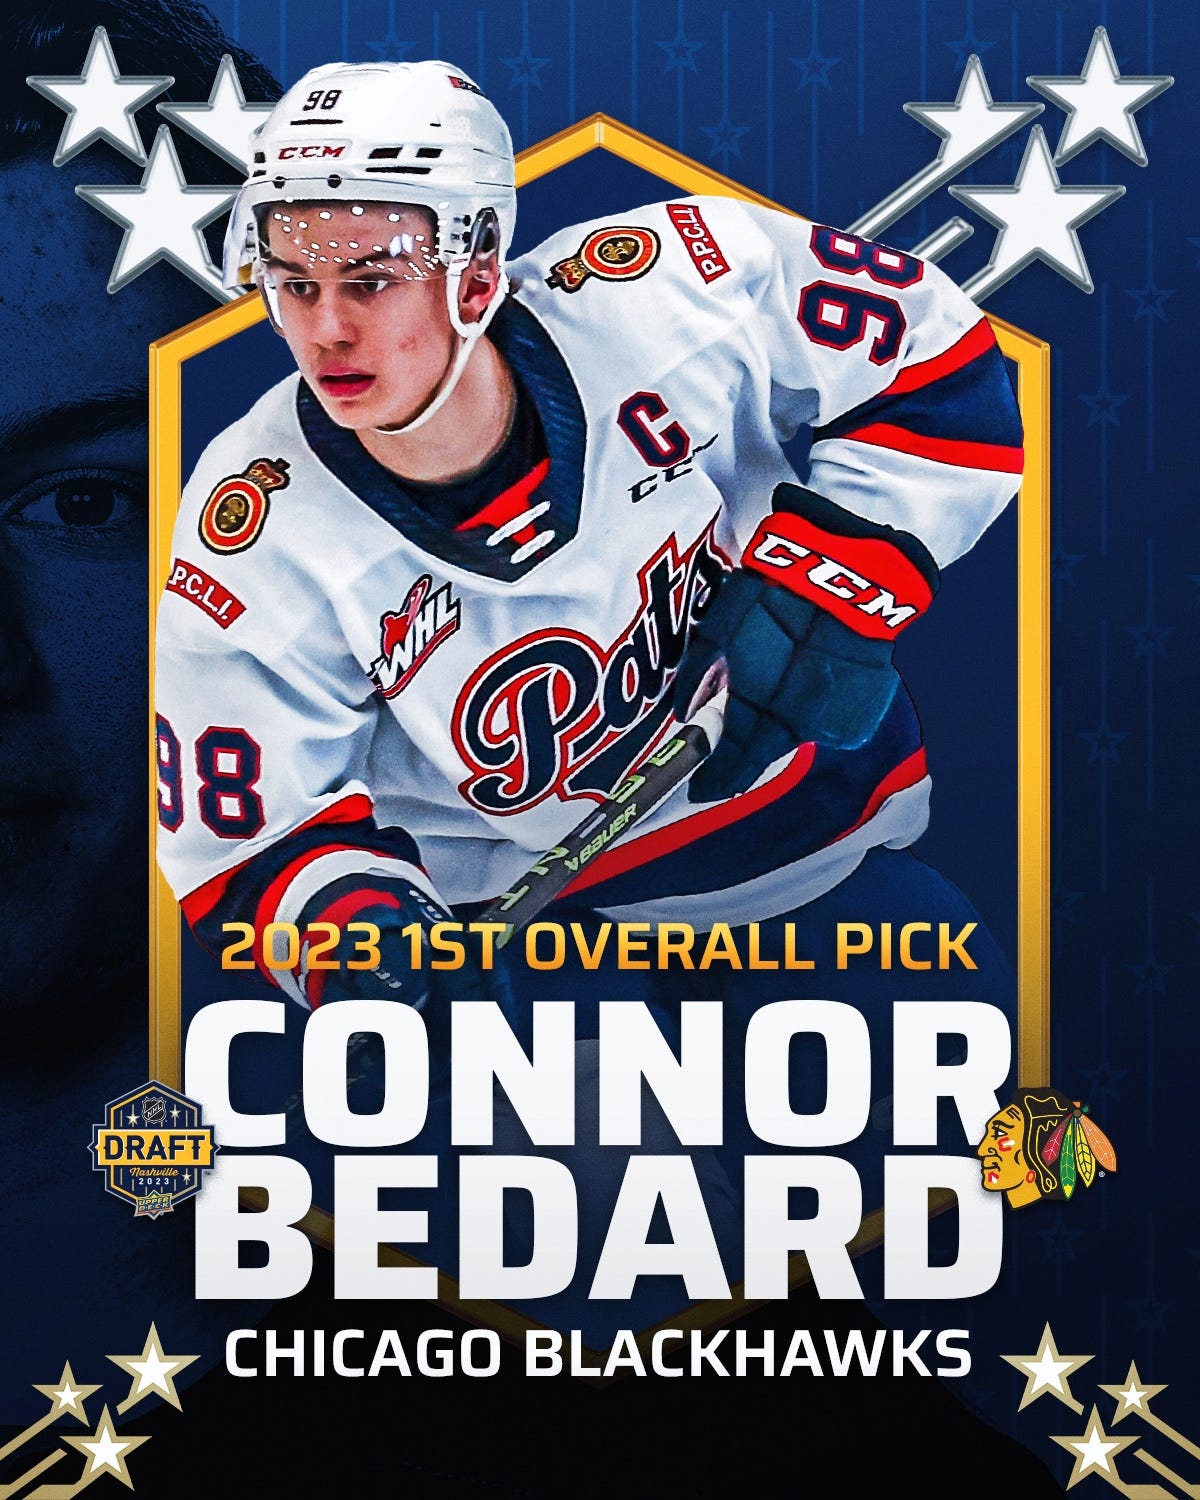 Bedard goes to Blackhawks with first pick in NHL draft, Etvarsity